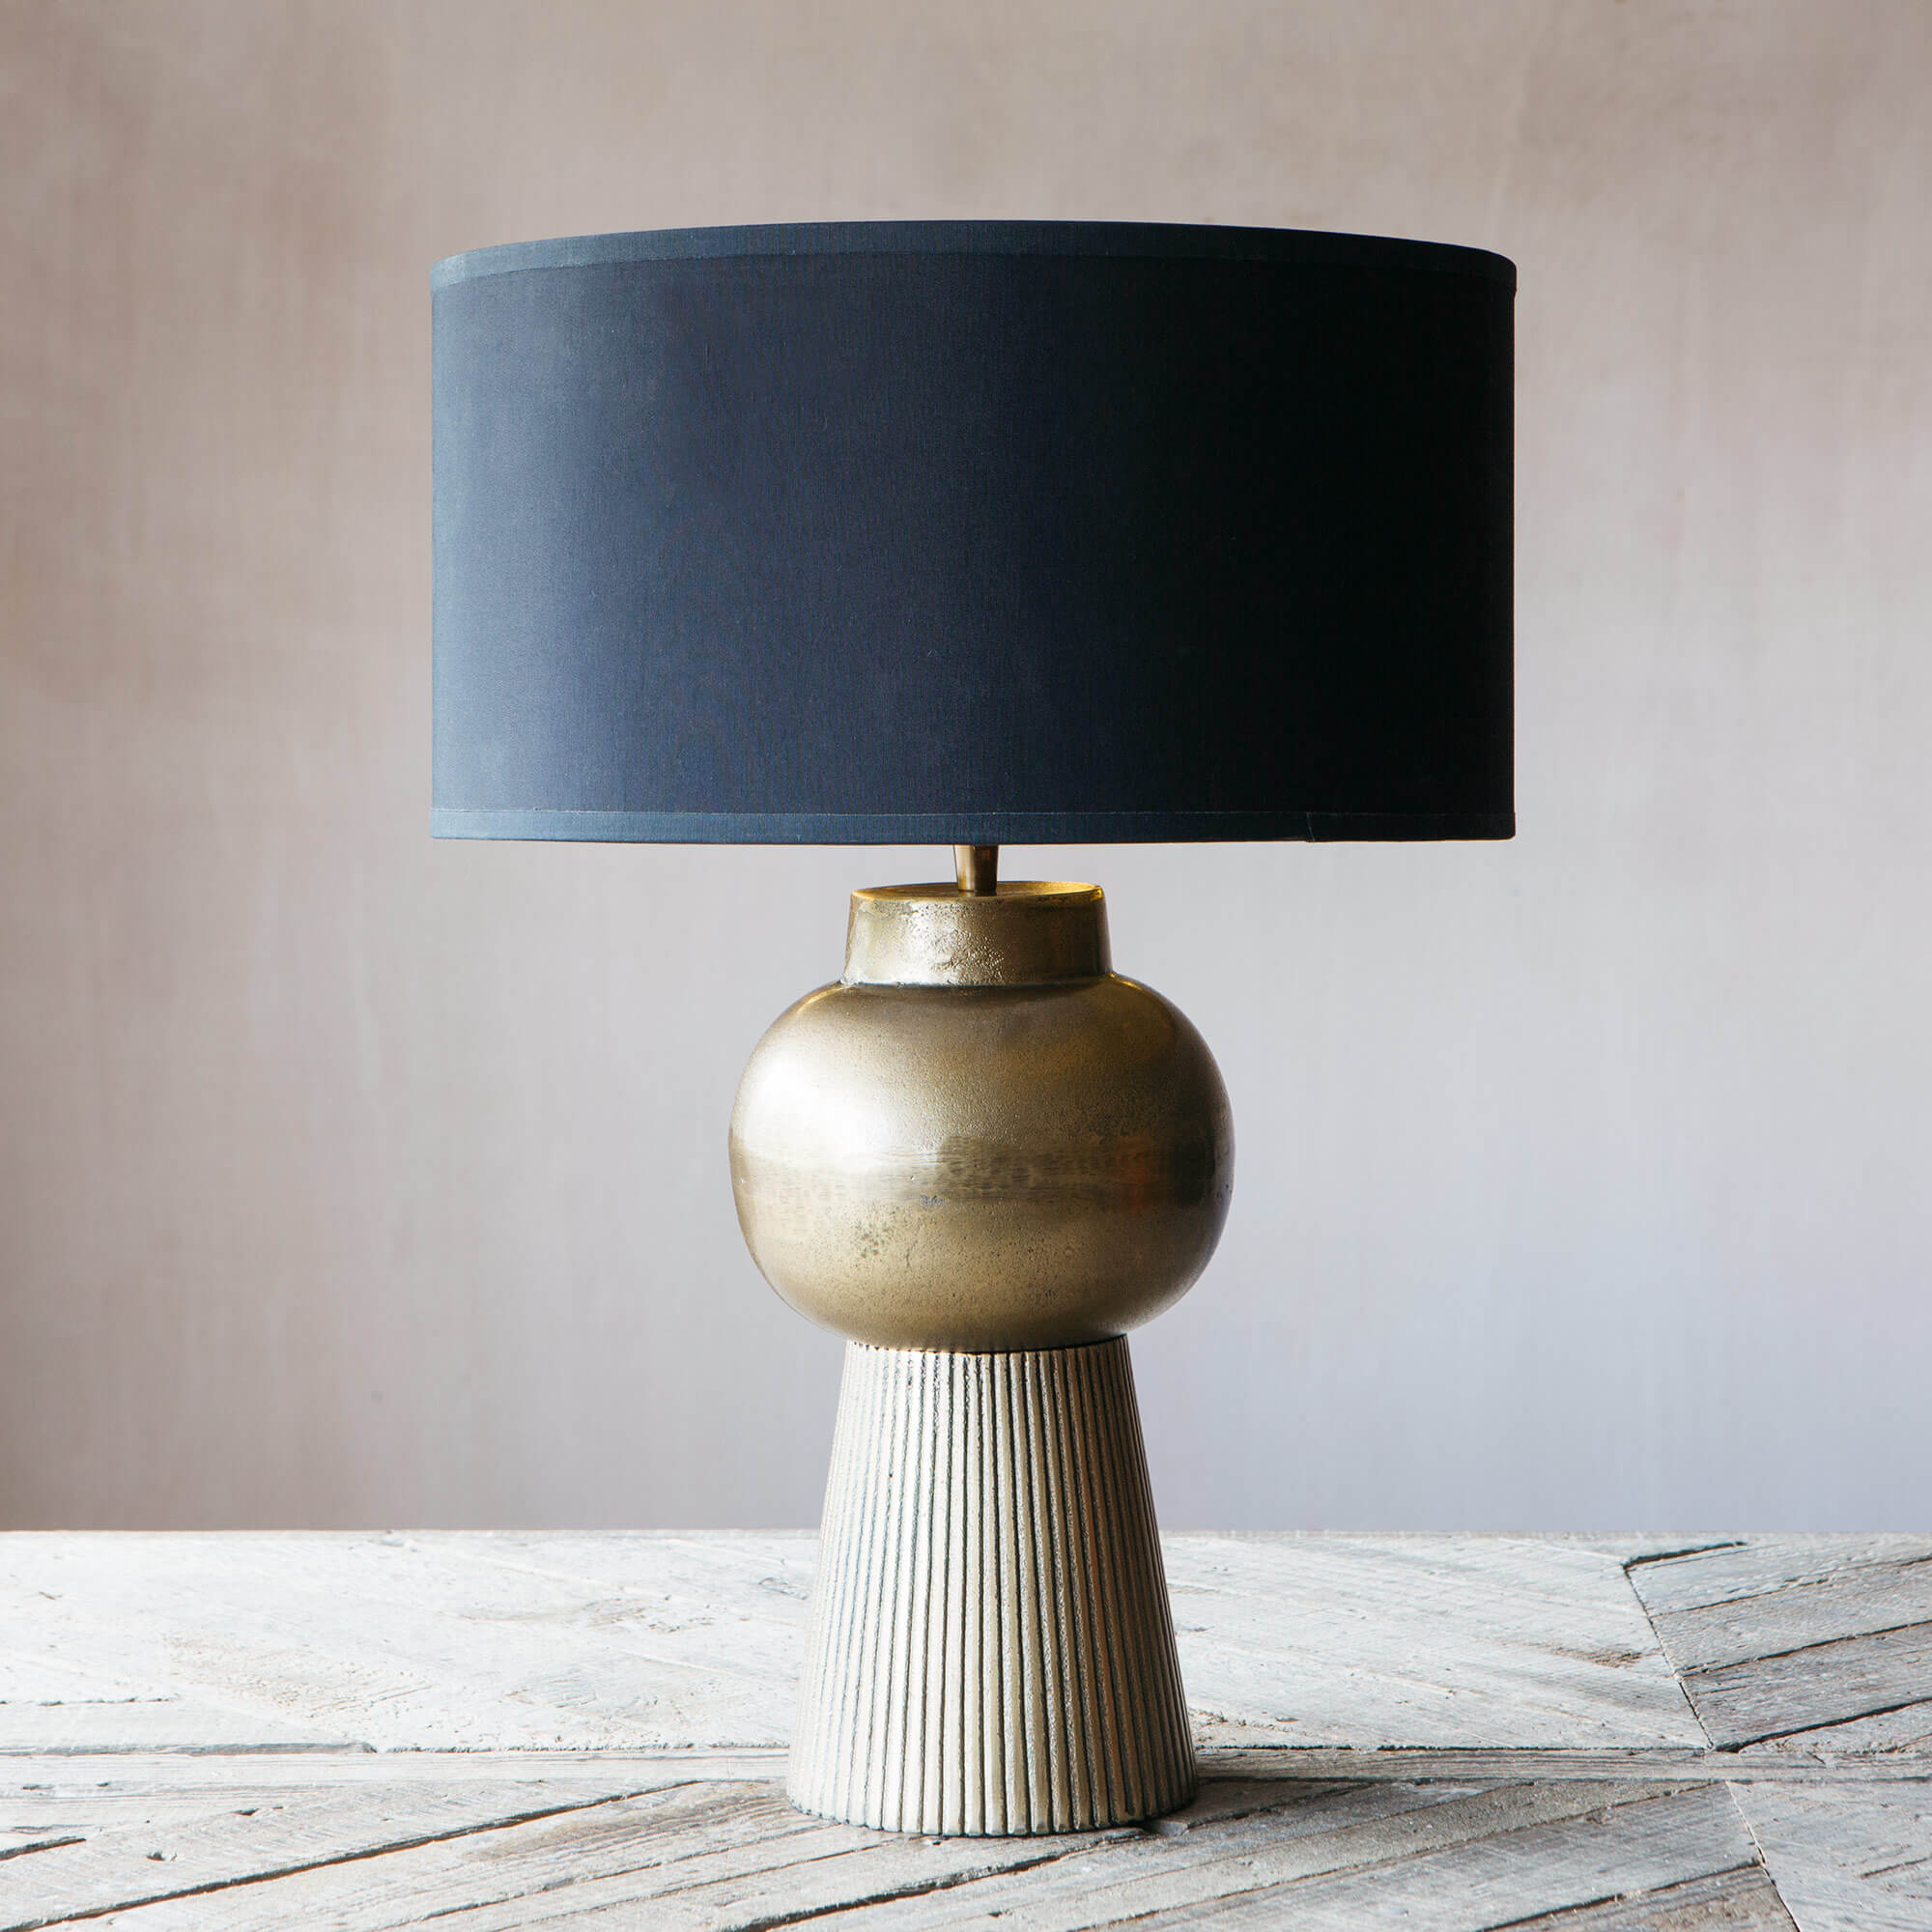 Read more about Graham and green small brika round bronze lamp